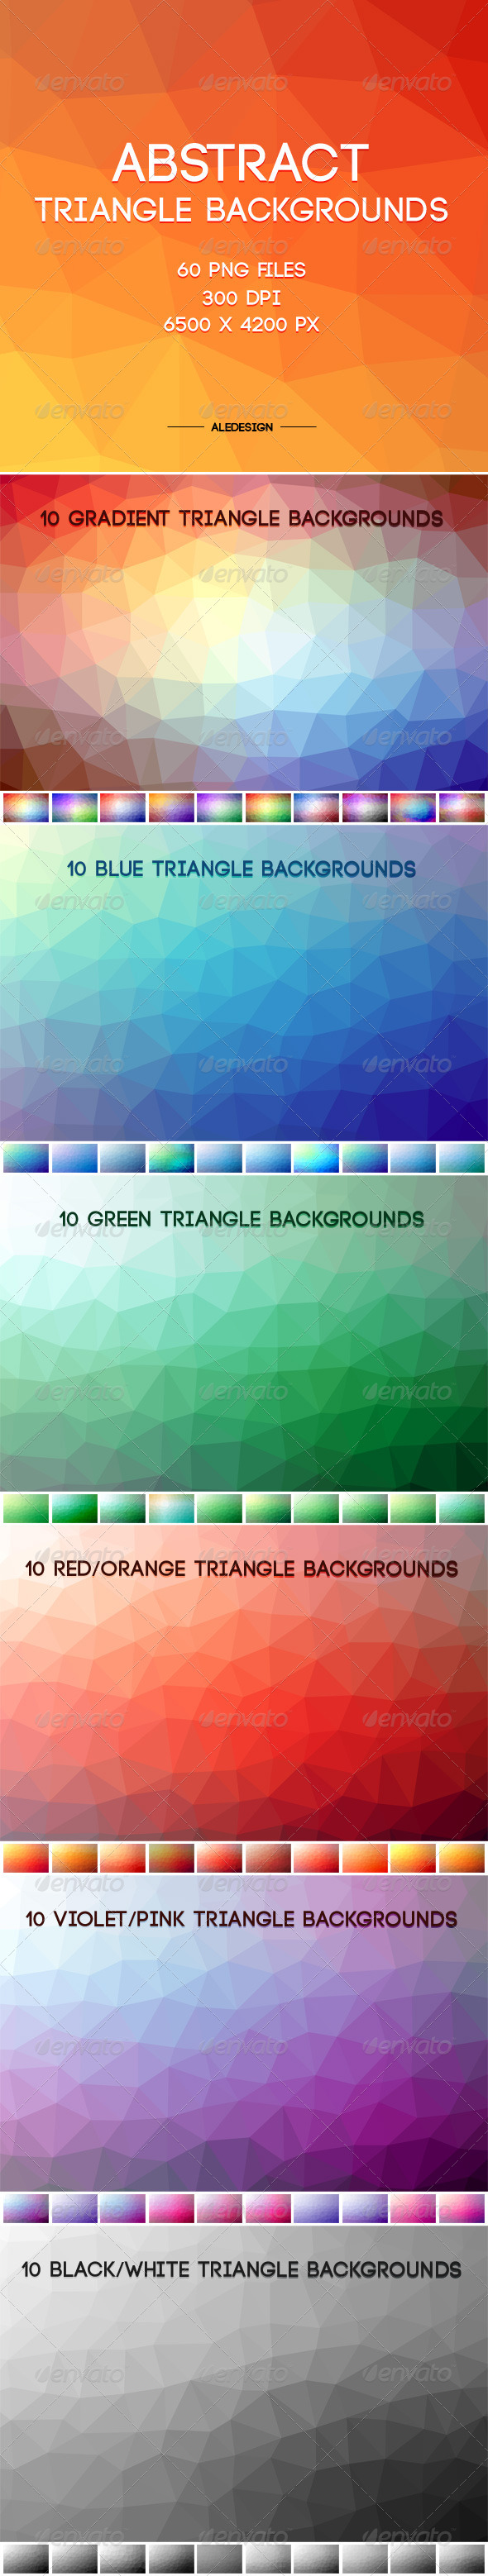 GraphicRiver Triangle Backgrounds 60 files 7677360